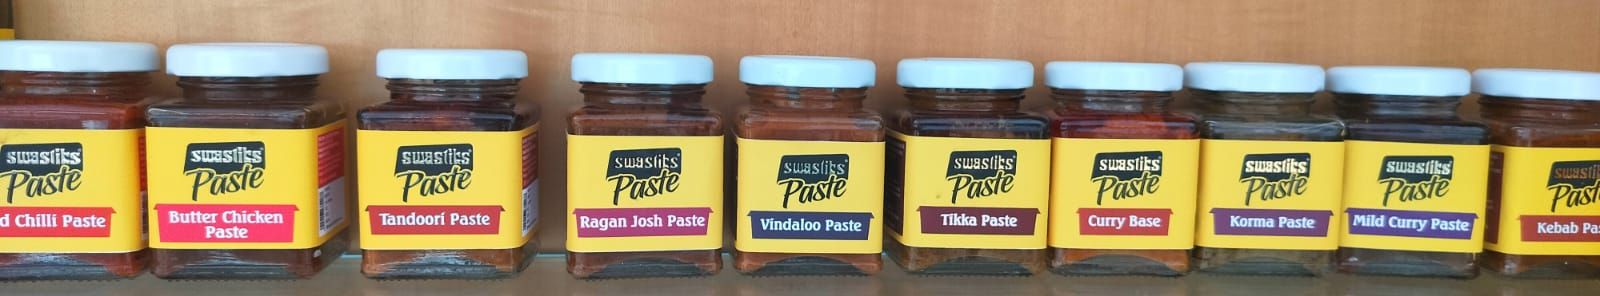 All Kinds of Pastes